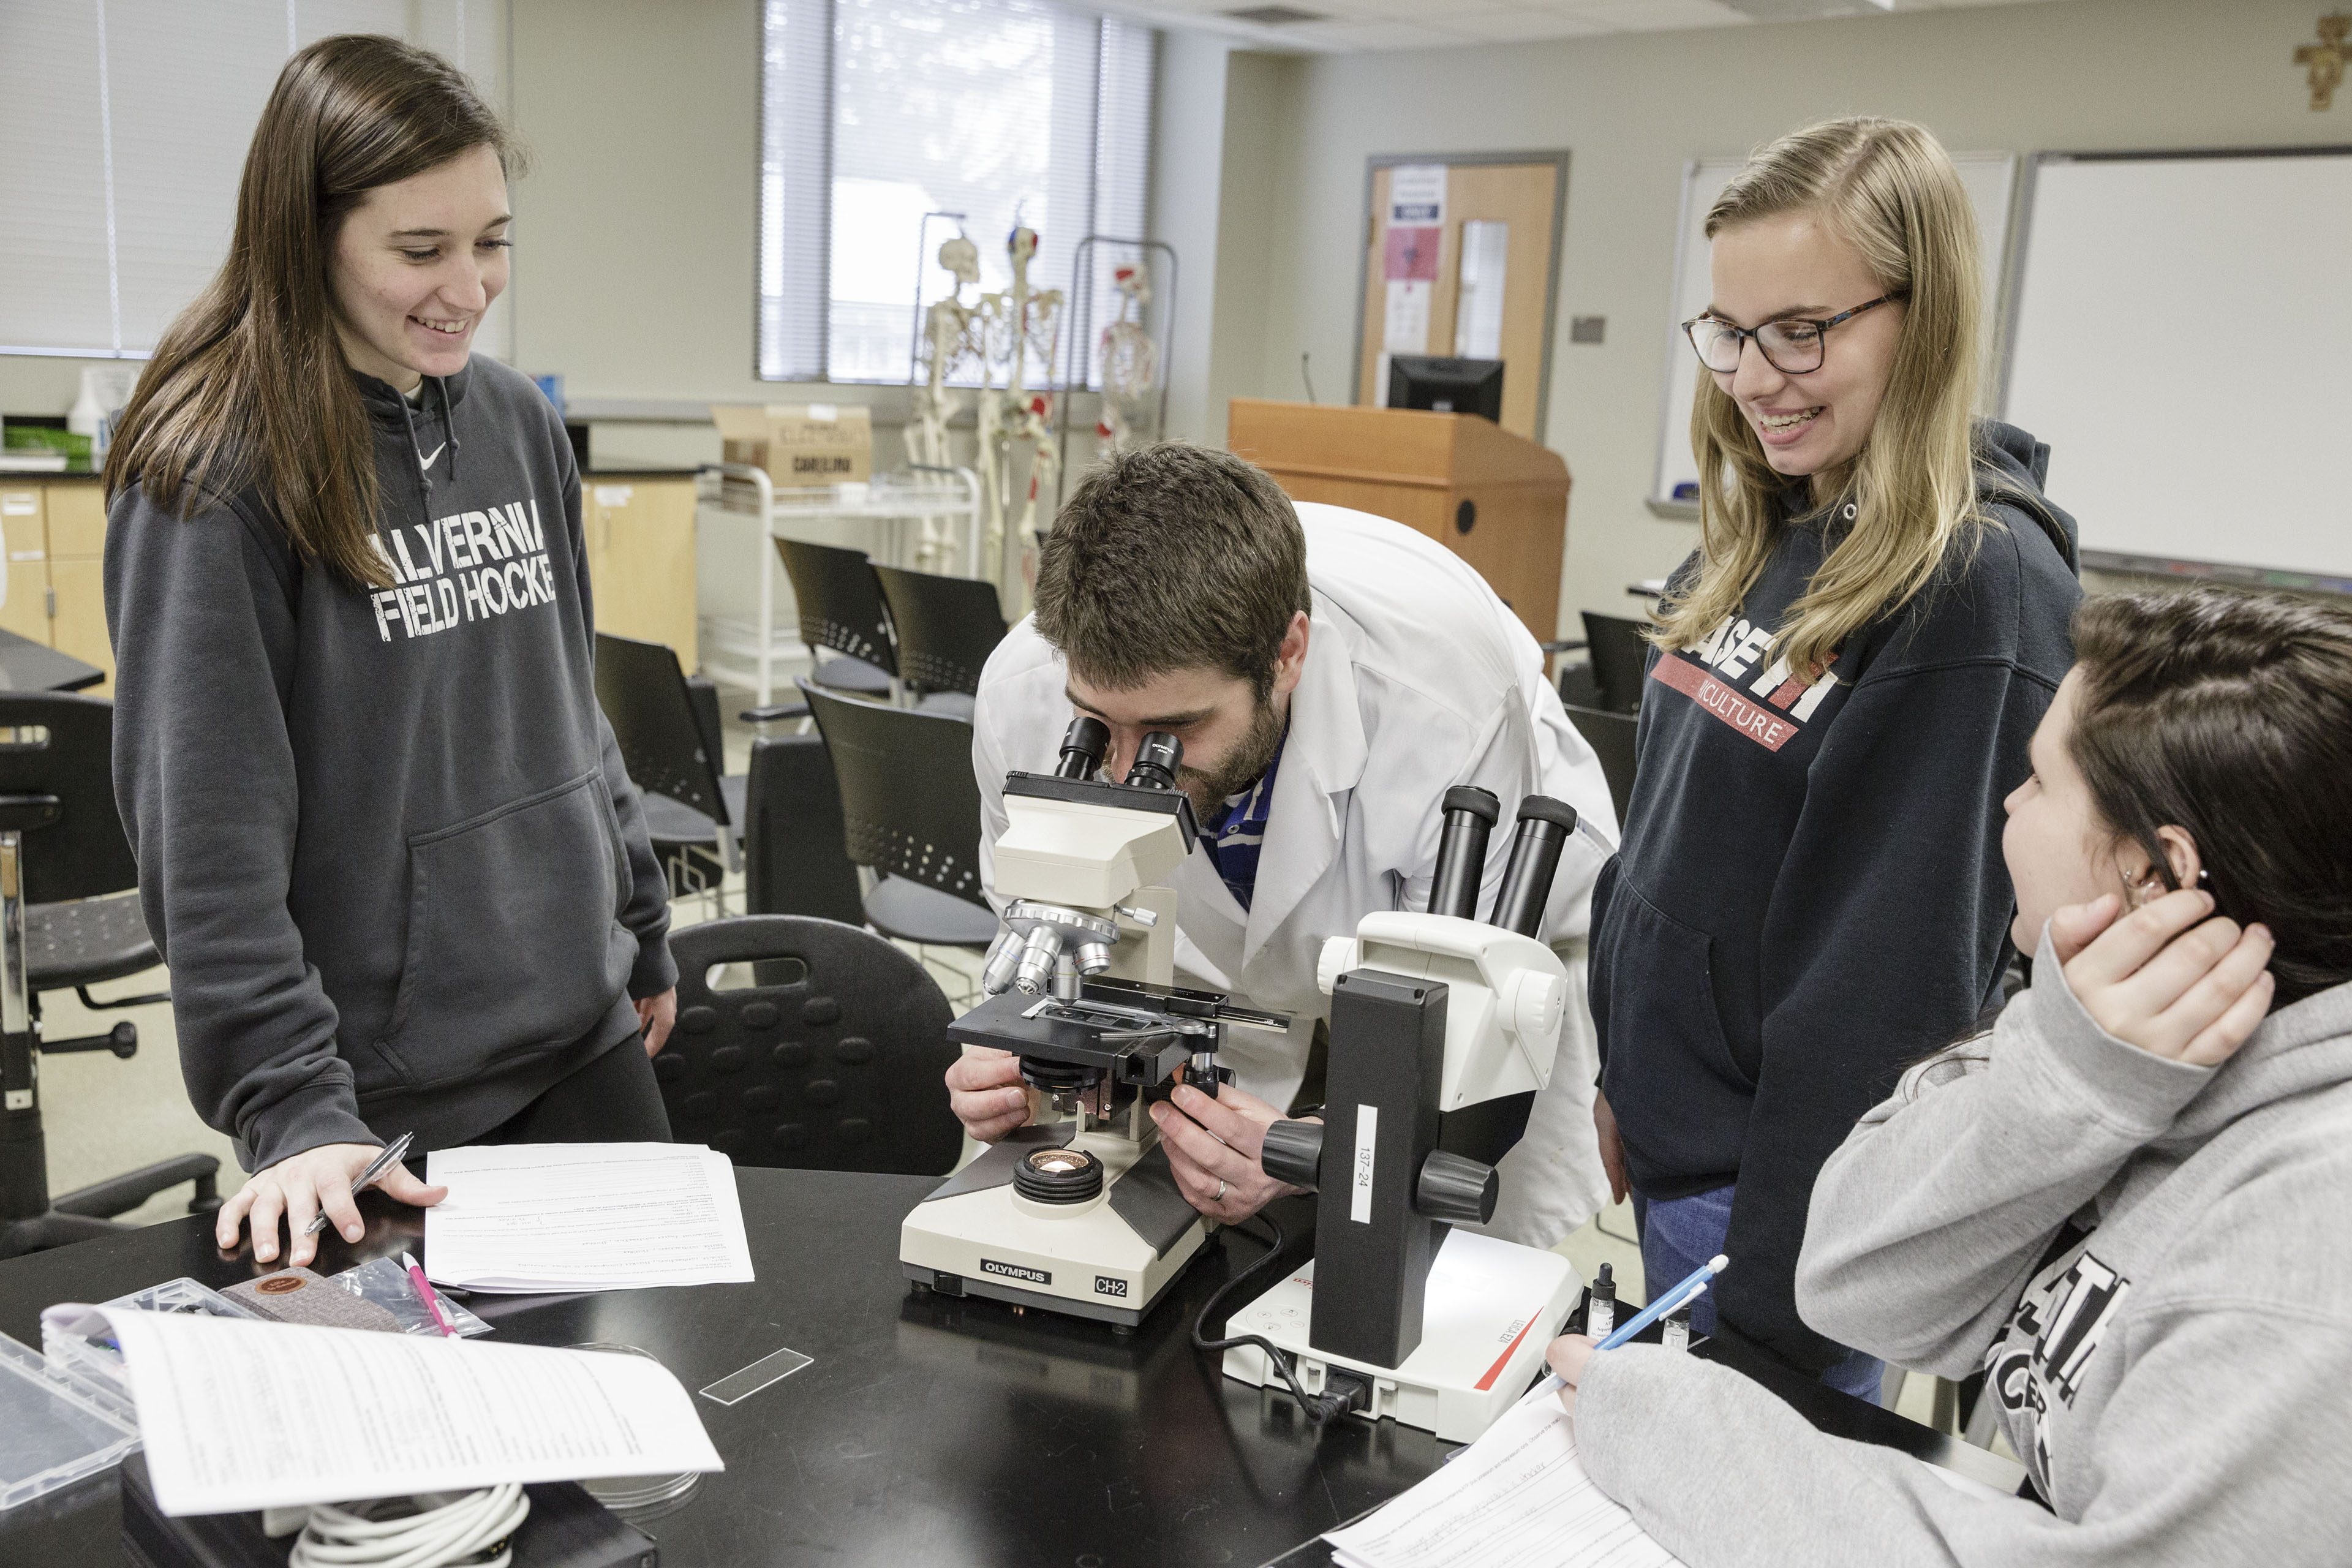 Biology professor demonstrating to students how to use a microscope.